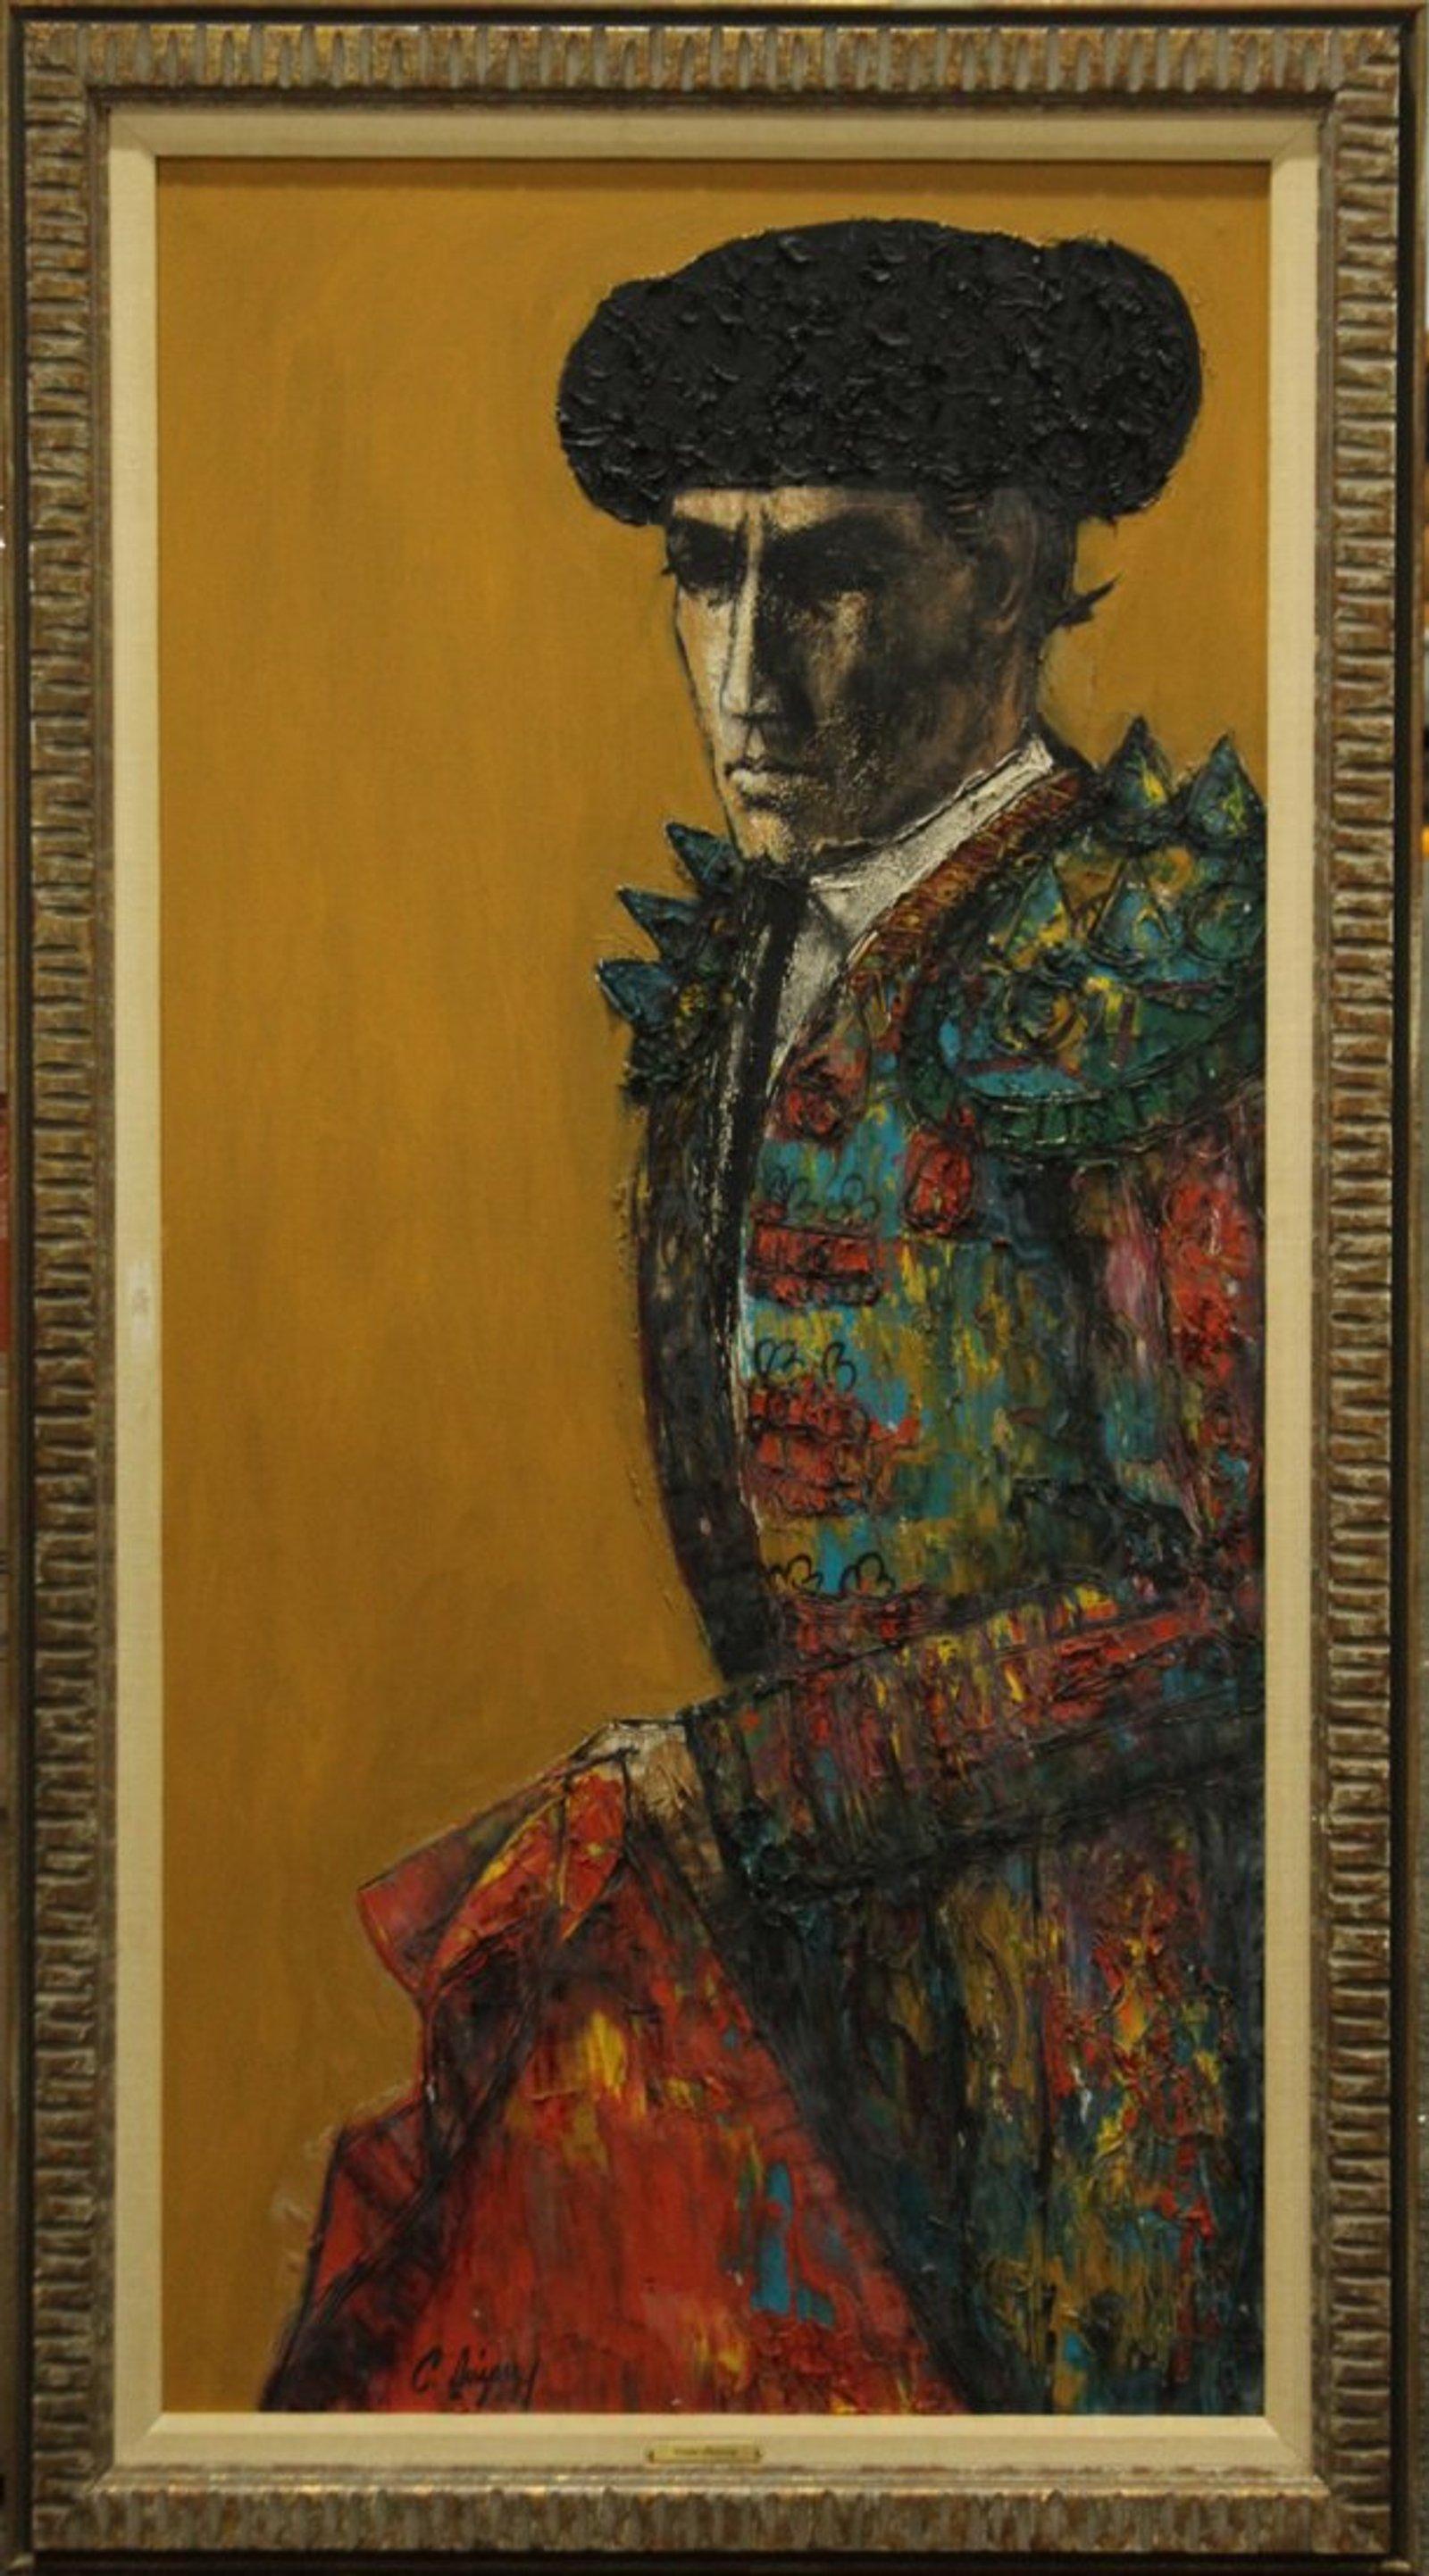 1965 Matador Oil on Canvas by Carlos Irizarry, oil on canvas, original gilt frame. excellent condition. Dimensions30ʺW × 3ʺD × 54ʺH

Born in Puerto Rico, Irizarry emigrated to New York and studied at the School of Art and Design in the 1940's. In